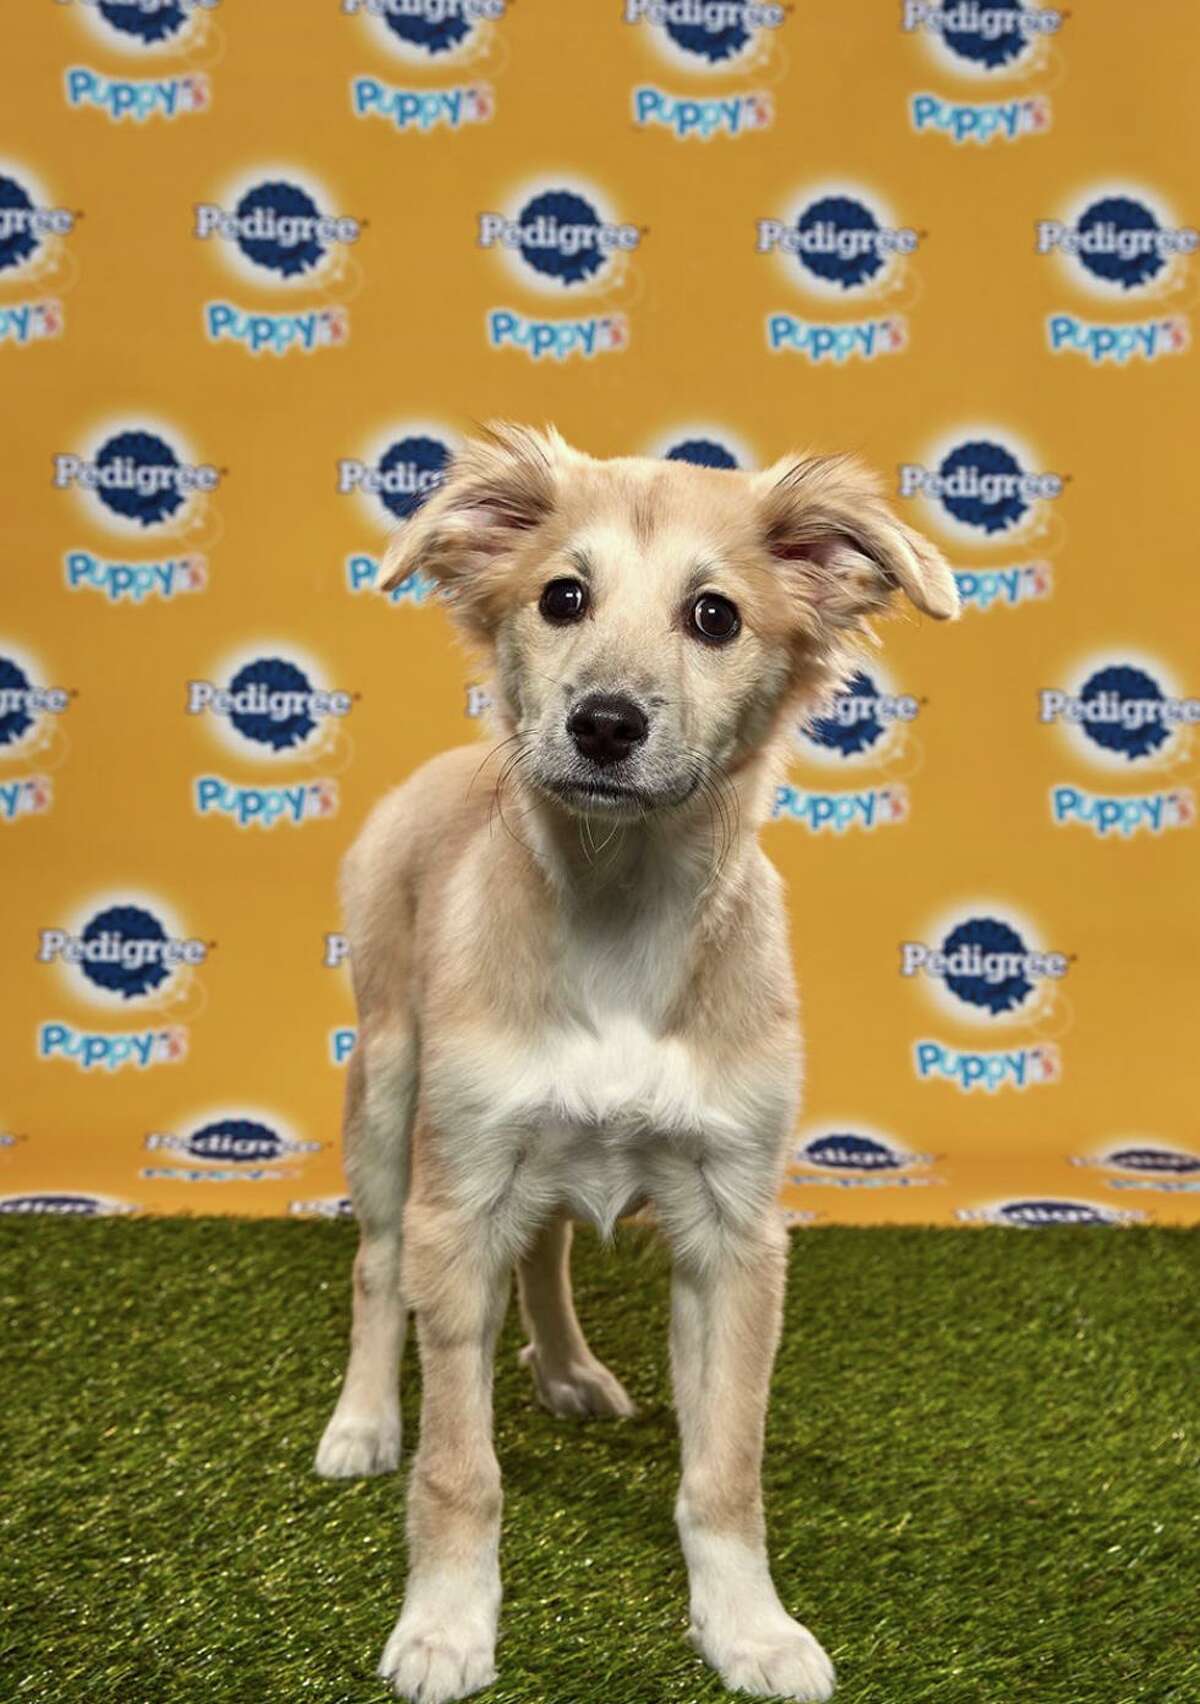 Local shelters send 19 dogs to the Animal Planet's Puppy Bowl